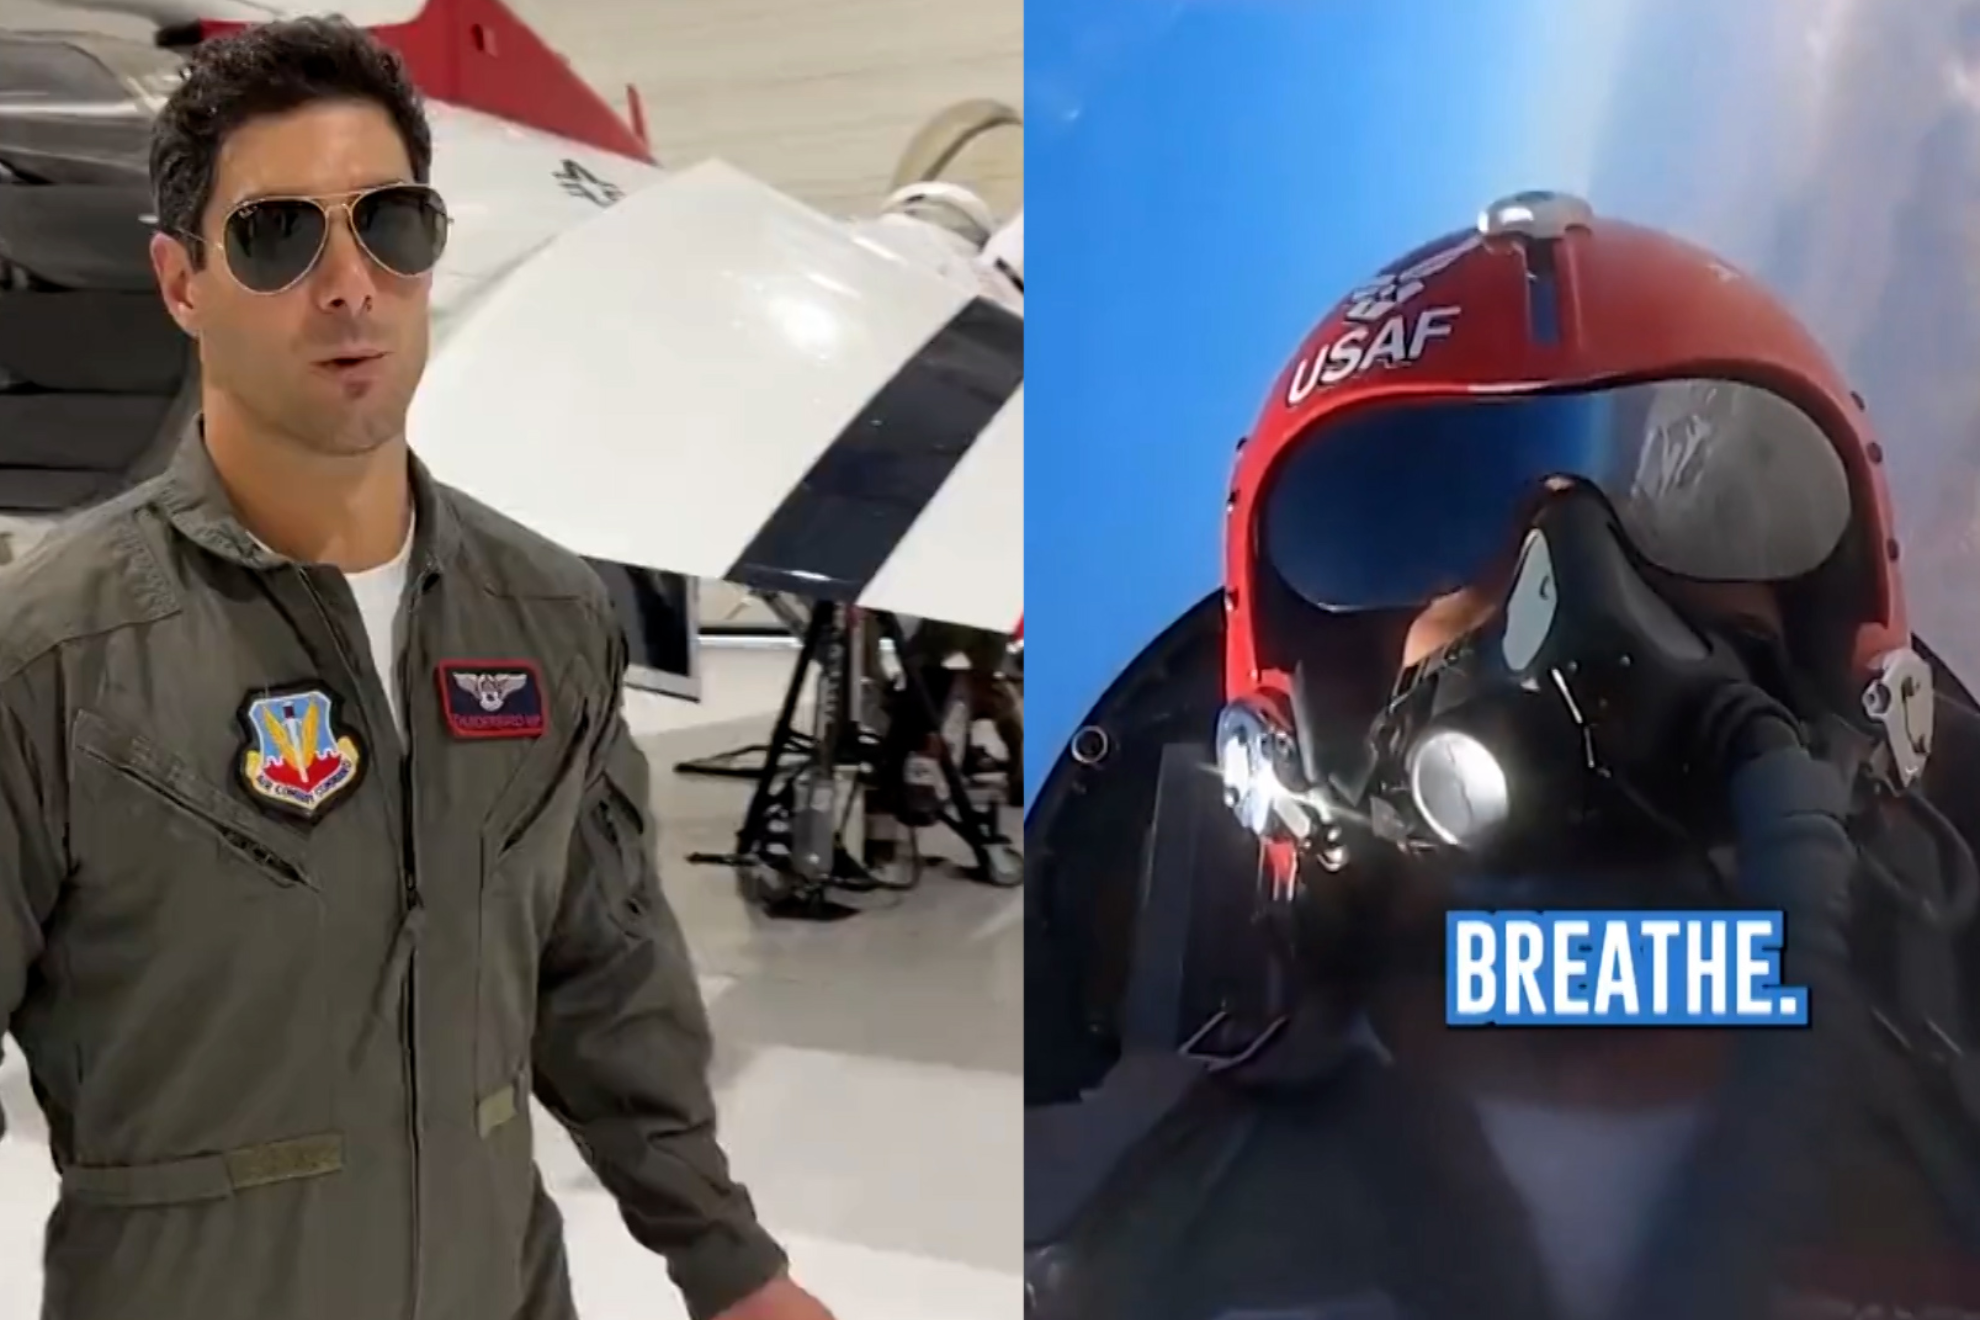 Jimmy Garoppolo flies US fighter jet as part of epic NFL training routine